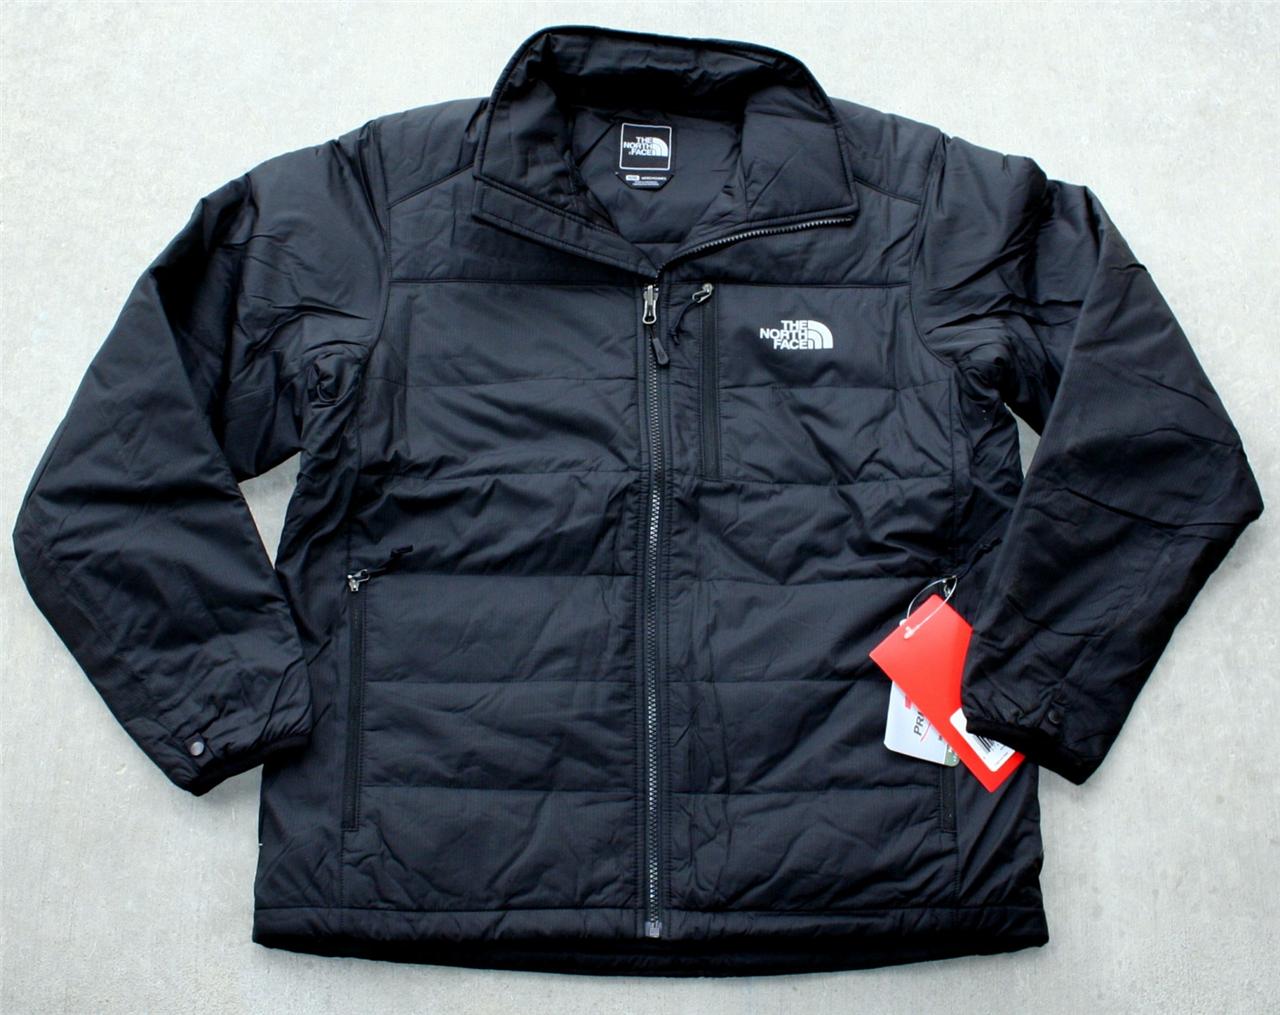 New NORTH FACE Redpoint Primaloft Insulated Jacket TNF Black Mens M L XL $149 - Picture 1 of 1